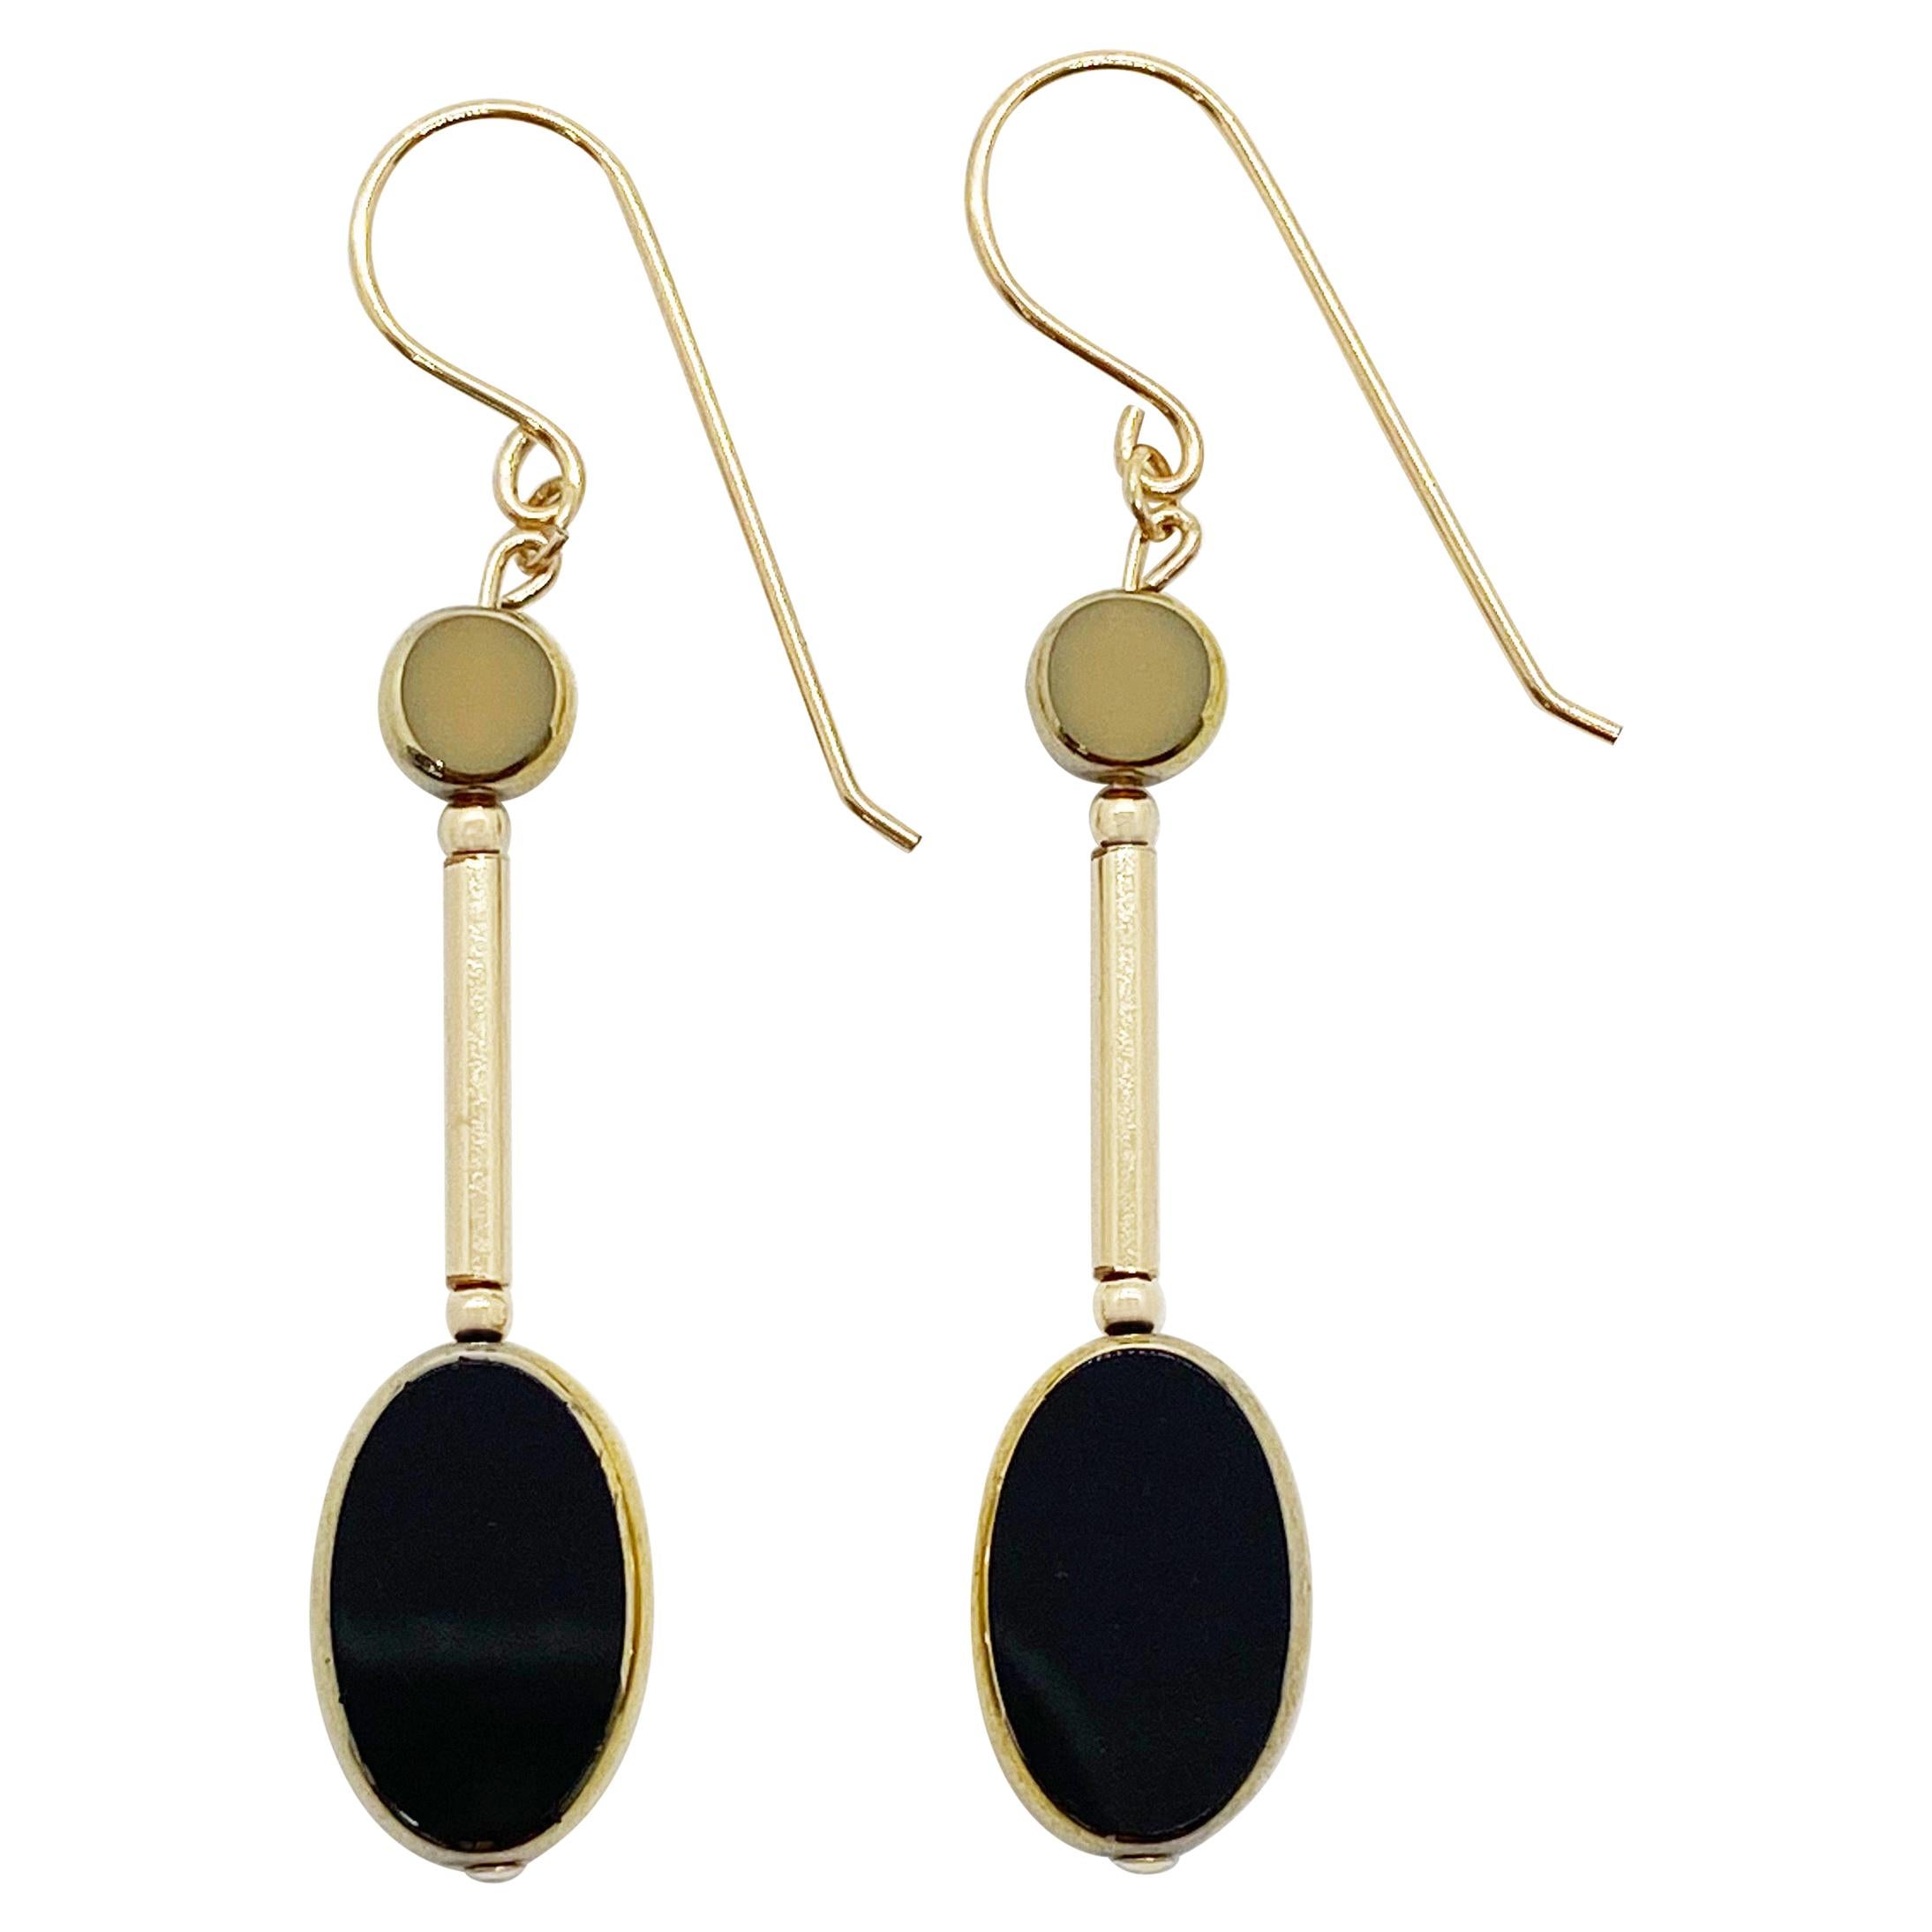 Vintage German Glass Beads edged with 24K gold, Black Paddle Earrings For Sale